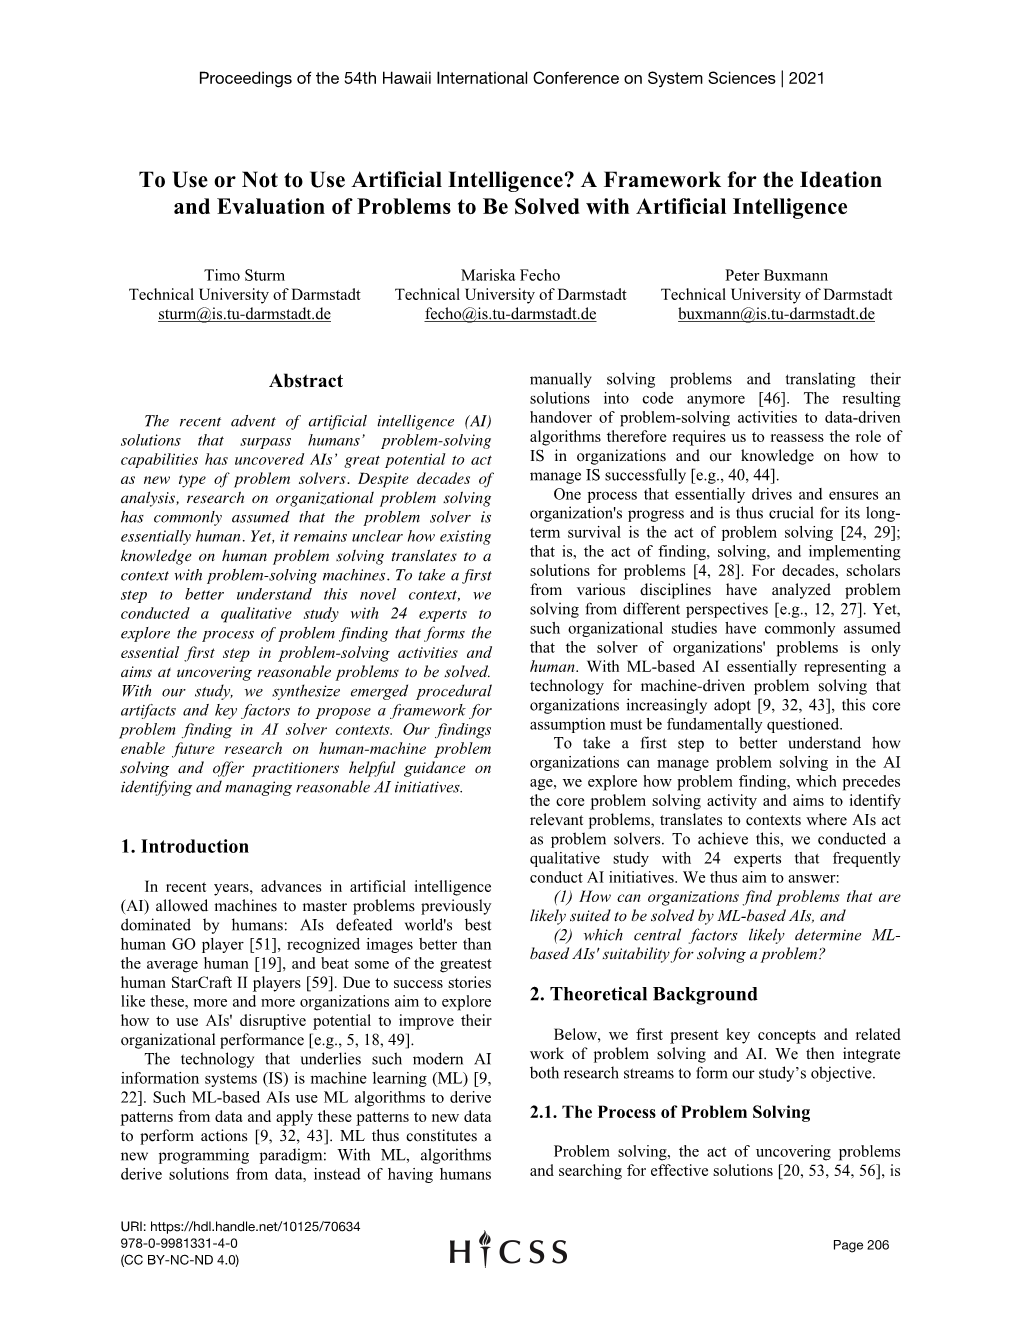 To Use Or Not to Use Artificial Intelligence? a Framework for the Ideation and Evaluation of Problems to Be Solved with Artificial Intelligence